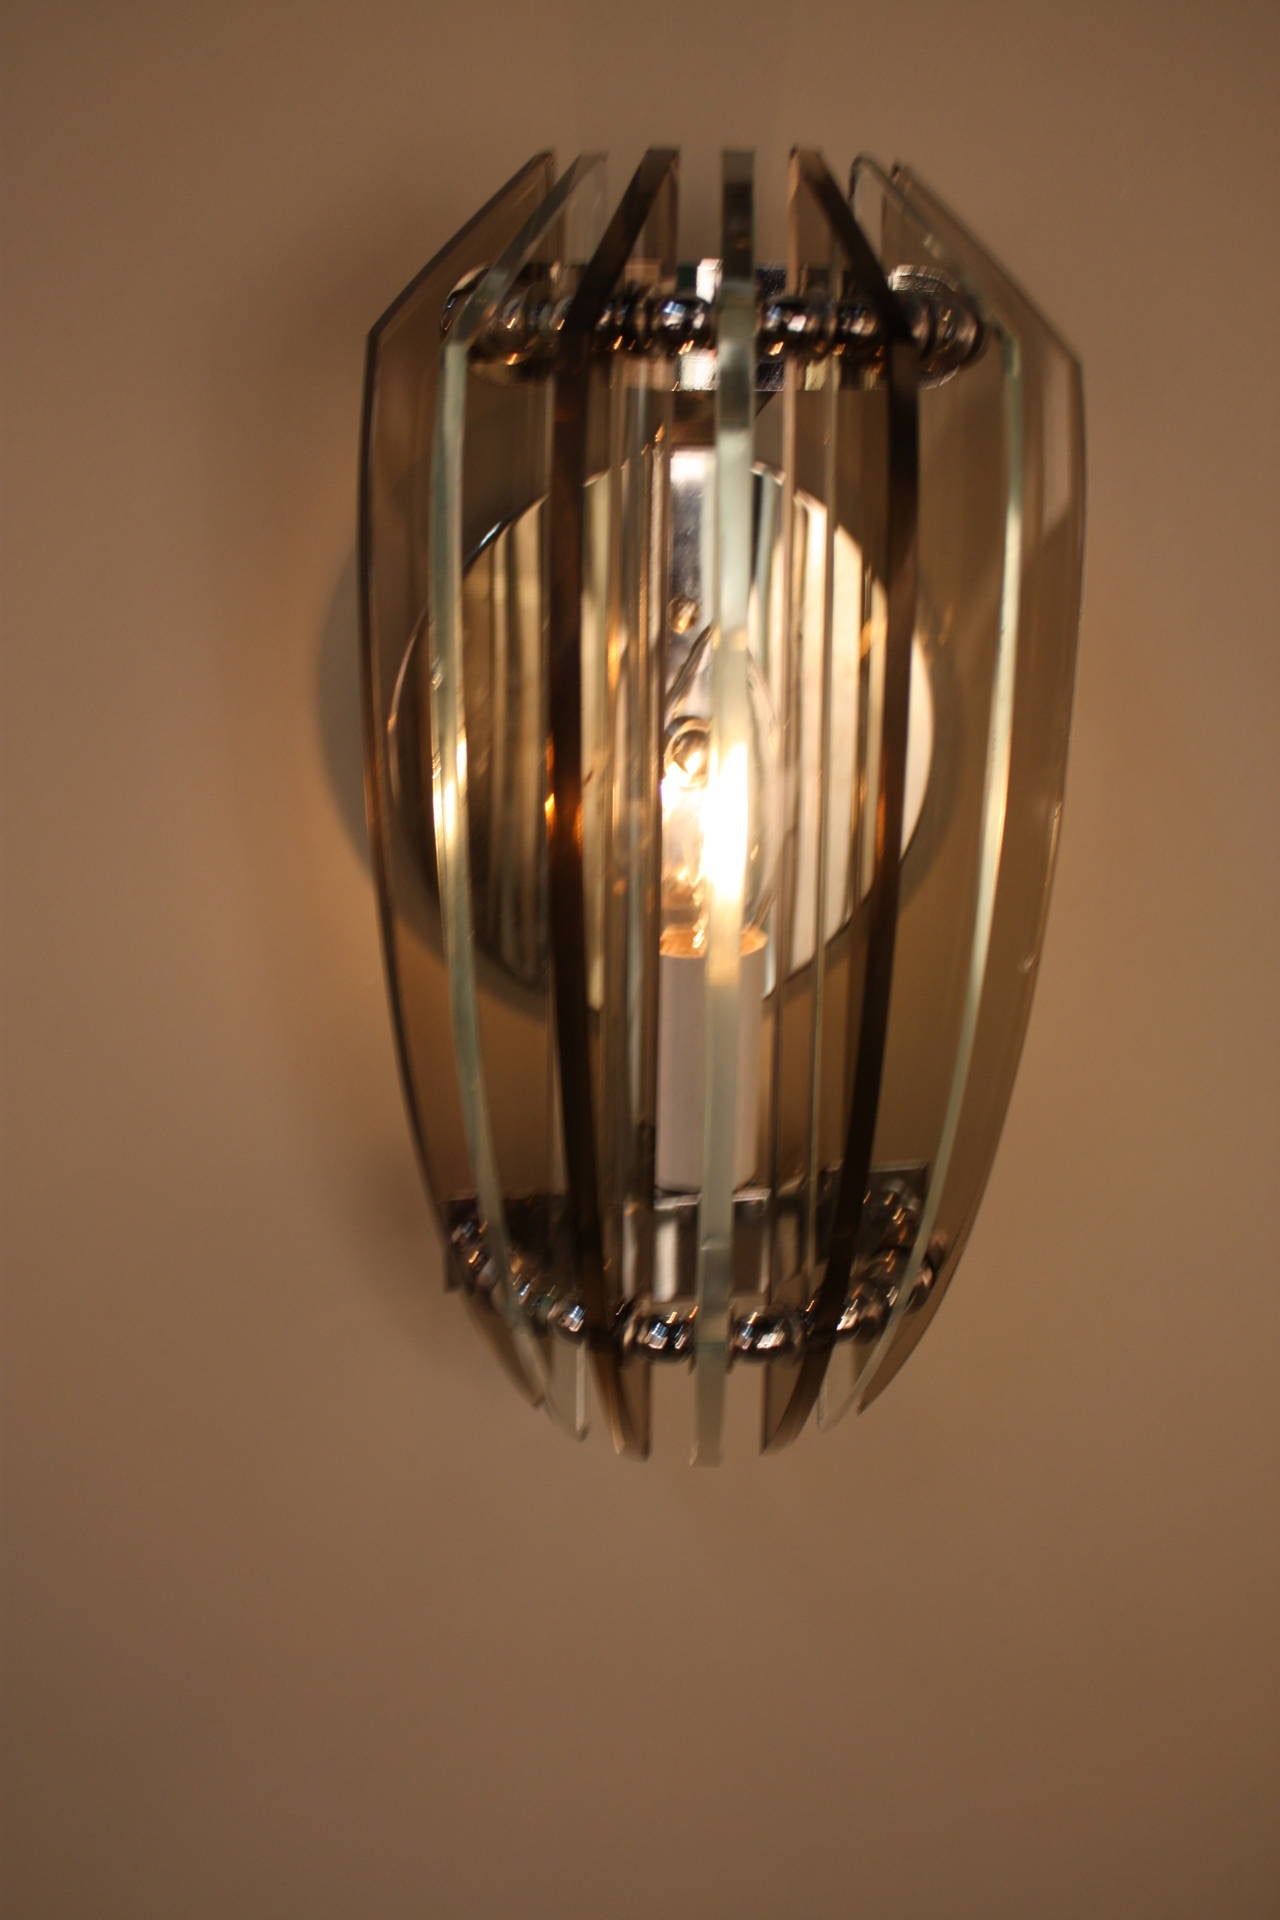 Simple but very chic wall sconces in clear and smoked glass by Veca.